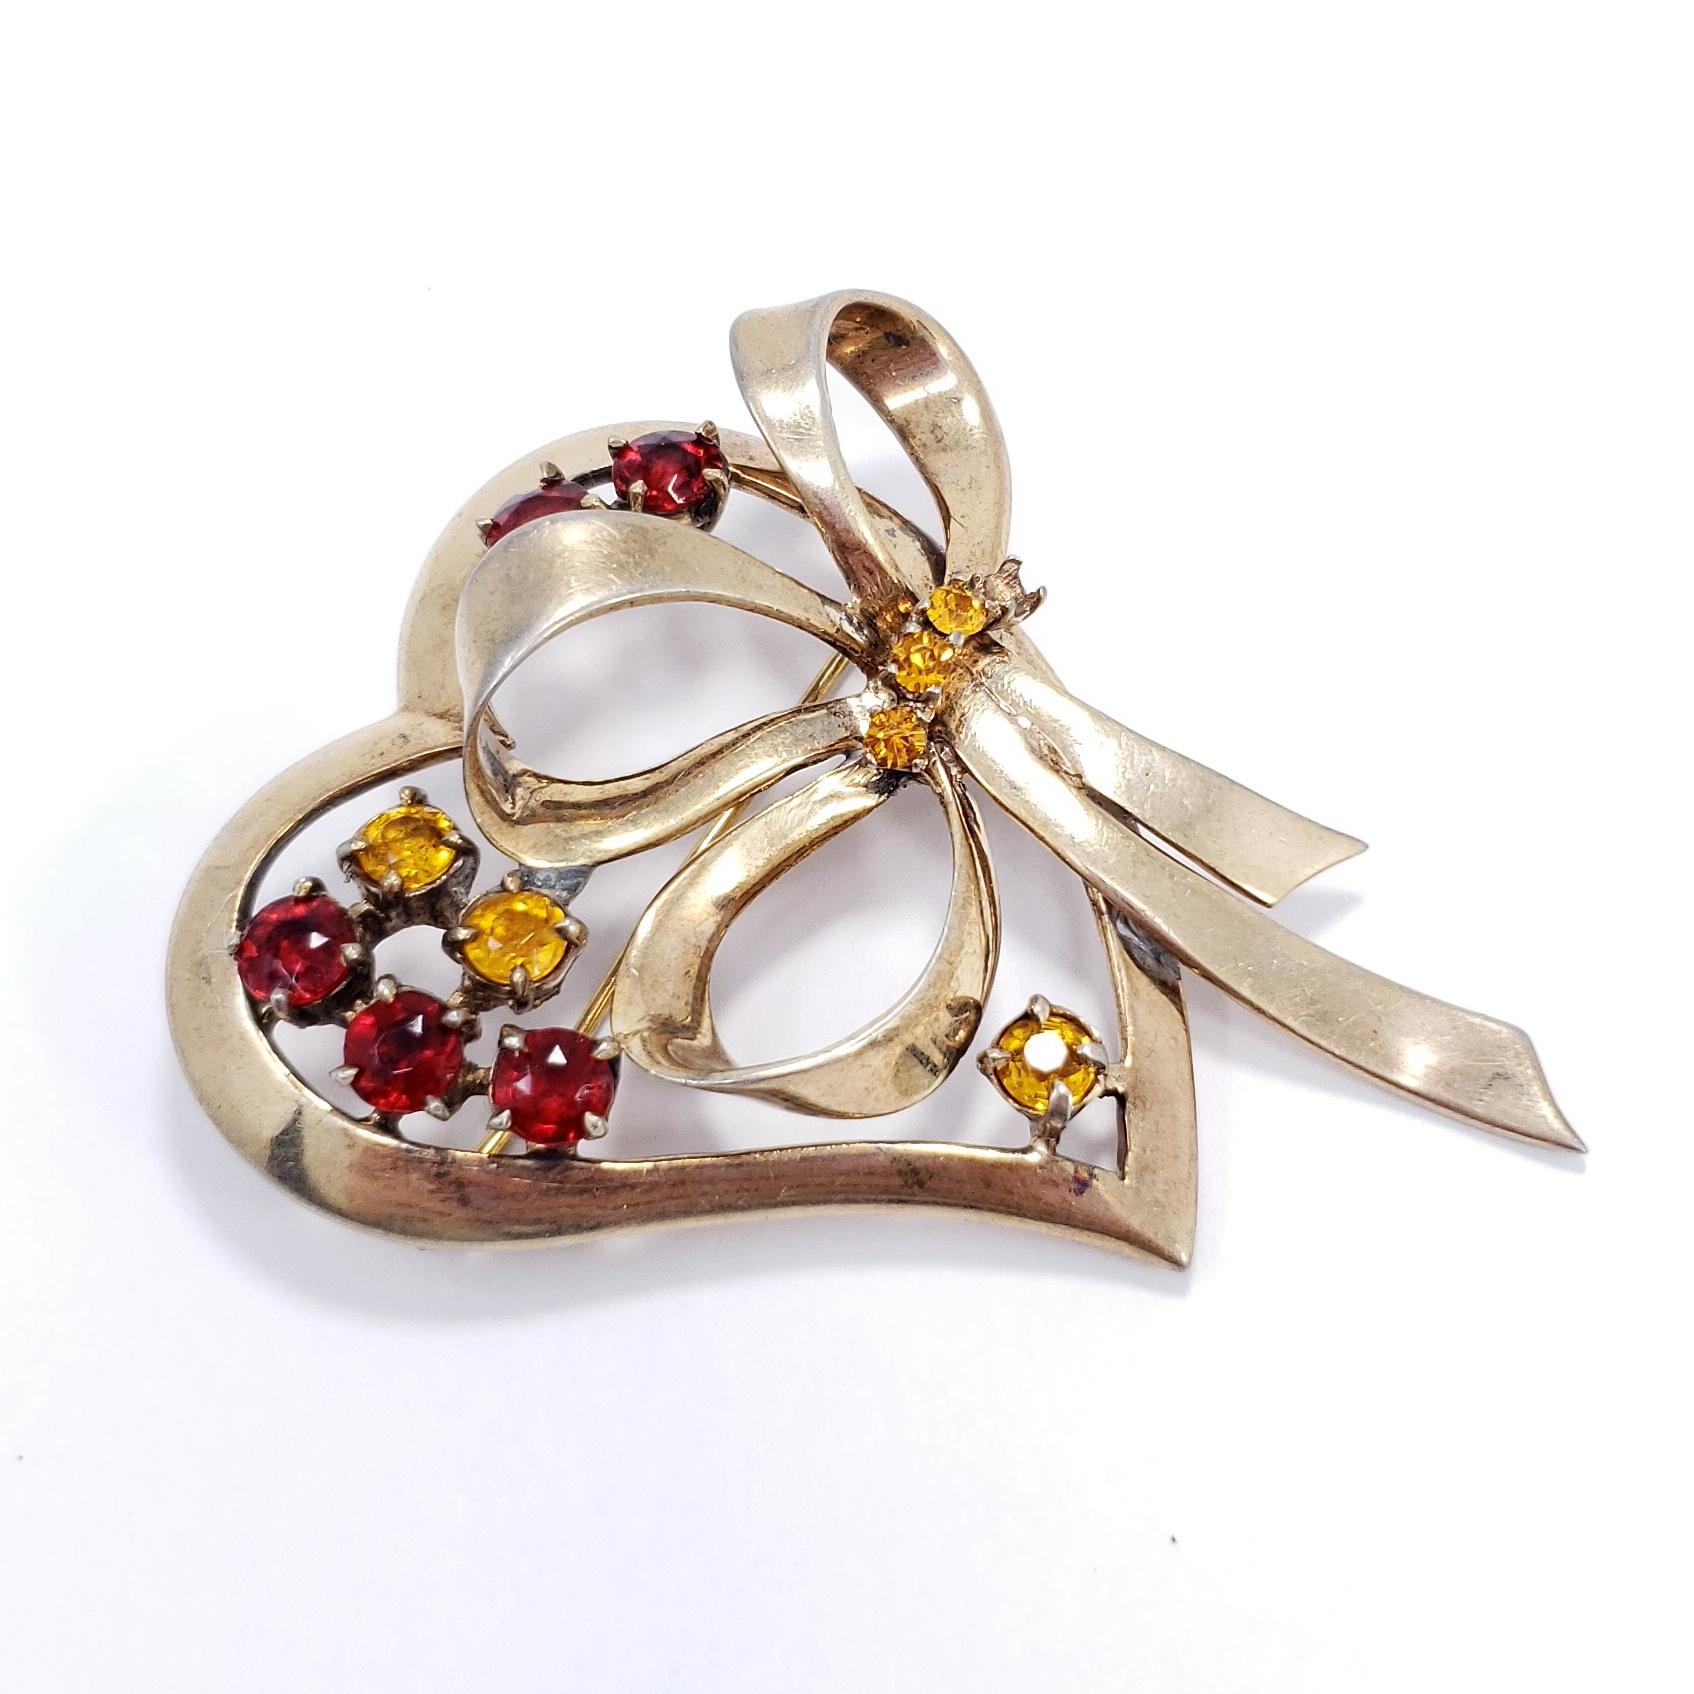 Stylish pin brooch from Ciner. Features a sterling silver, gold-plated heart and bow motif decorated with citrine and ruby-colored crystals.

Gold-plated sterling silver (vermeil).

Hallmarks: Ciner, Sterling

Good condition. Has been repaired.